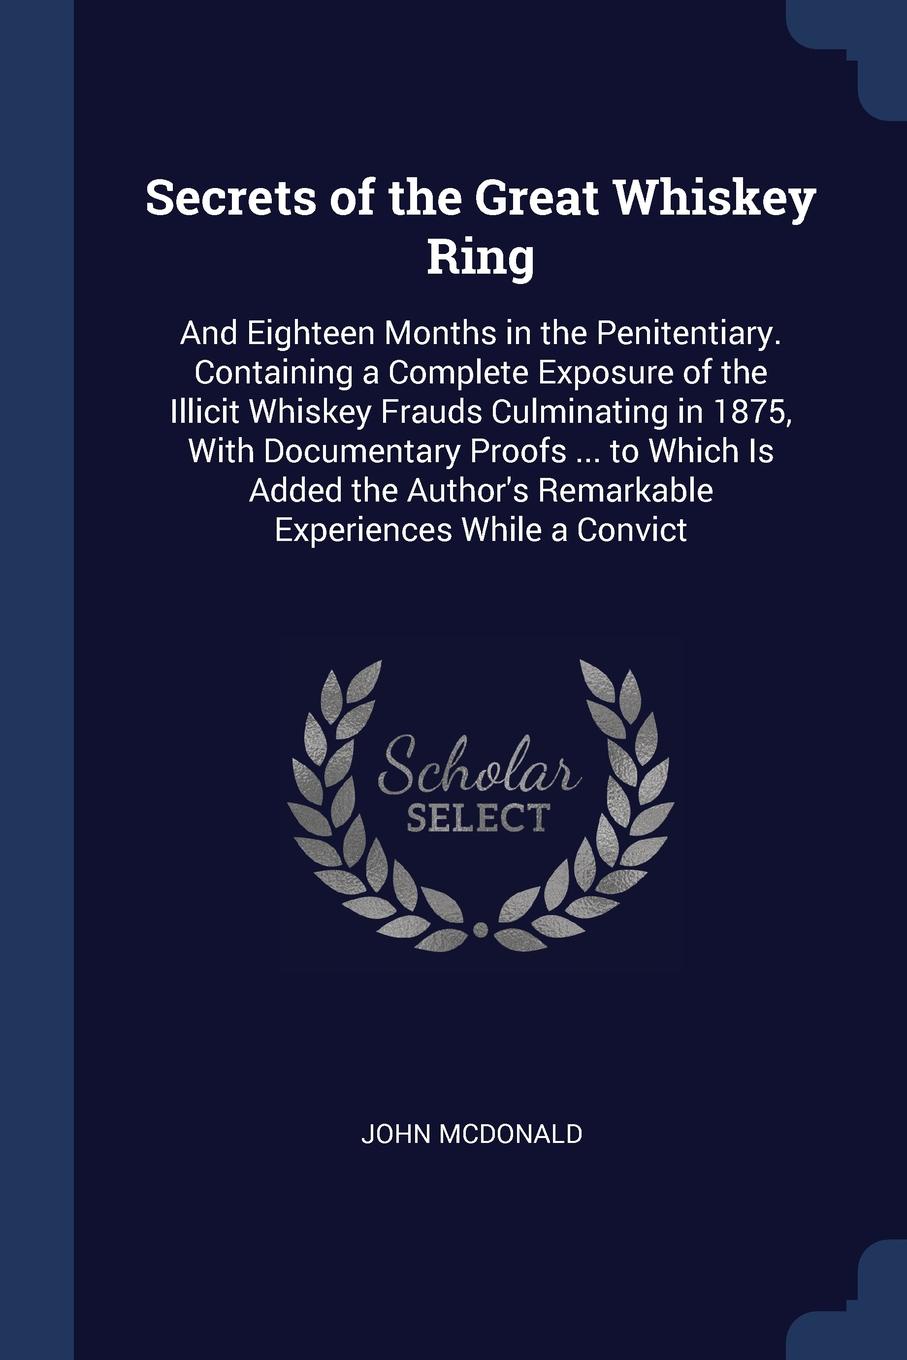 Secrets of the Great Whiskey Ring. And Eighteen Months in the Penitentiary. Containing a Complete Exposure of the Illicit Whiskey Frauds Culminating in 1875, With Documentary Proofs ... to Which Is Added the Author`s Remarkable Experiences While a...